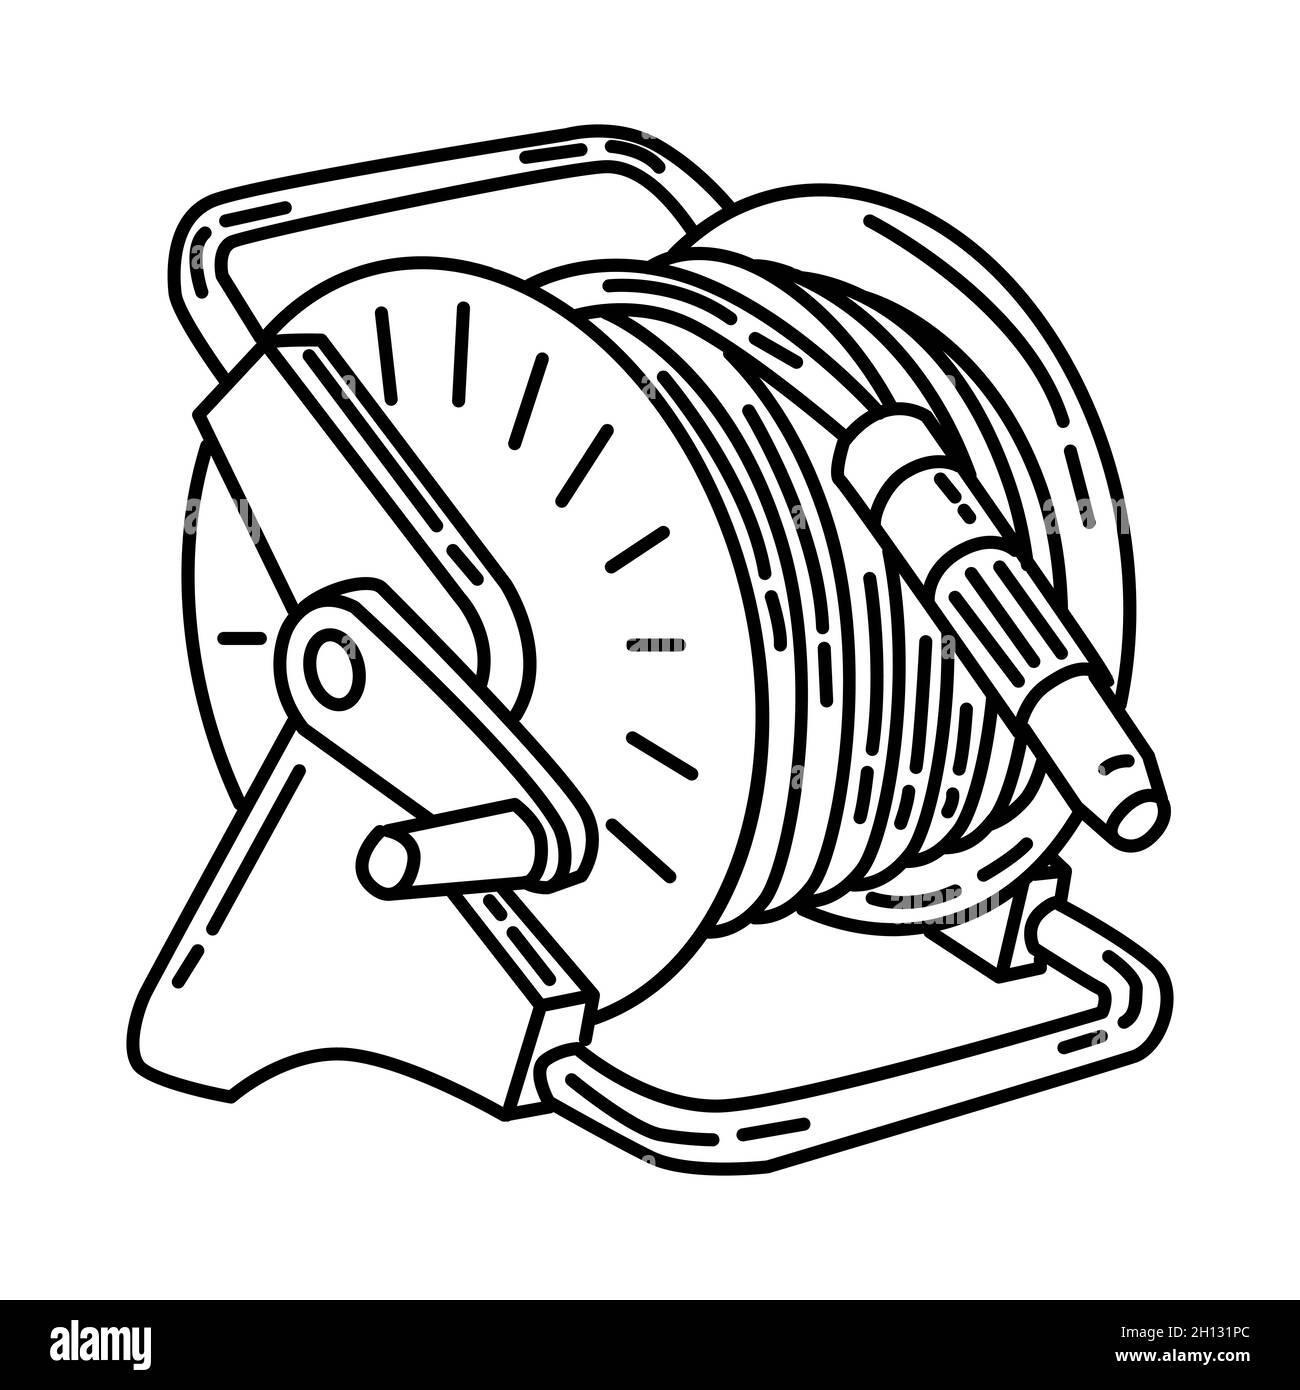 https://c8.alamy.com/comp/2H131PC/fire-hose-reel-part-of-firefighter-accessories-and-equipment-device-hand-drawn-icon-set-vector-2H131PC.jpg